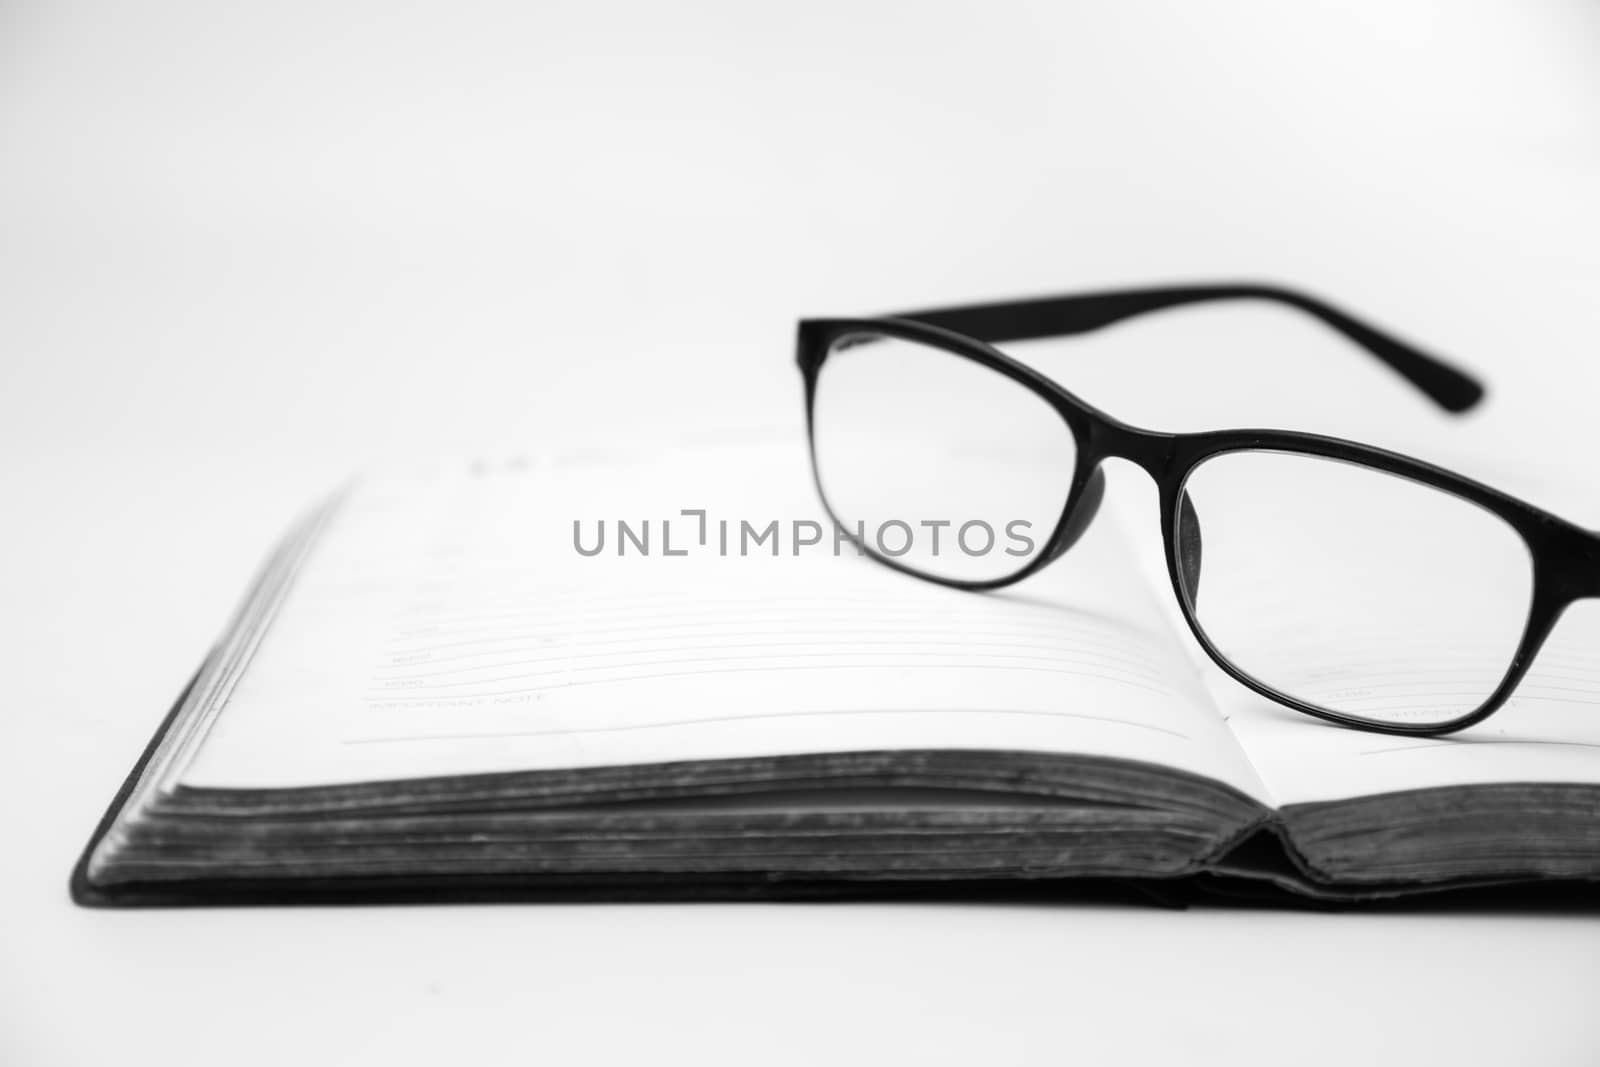 Eyeglasses on an open book, Black and White tone by ronnarong